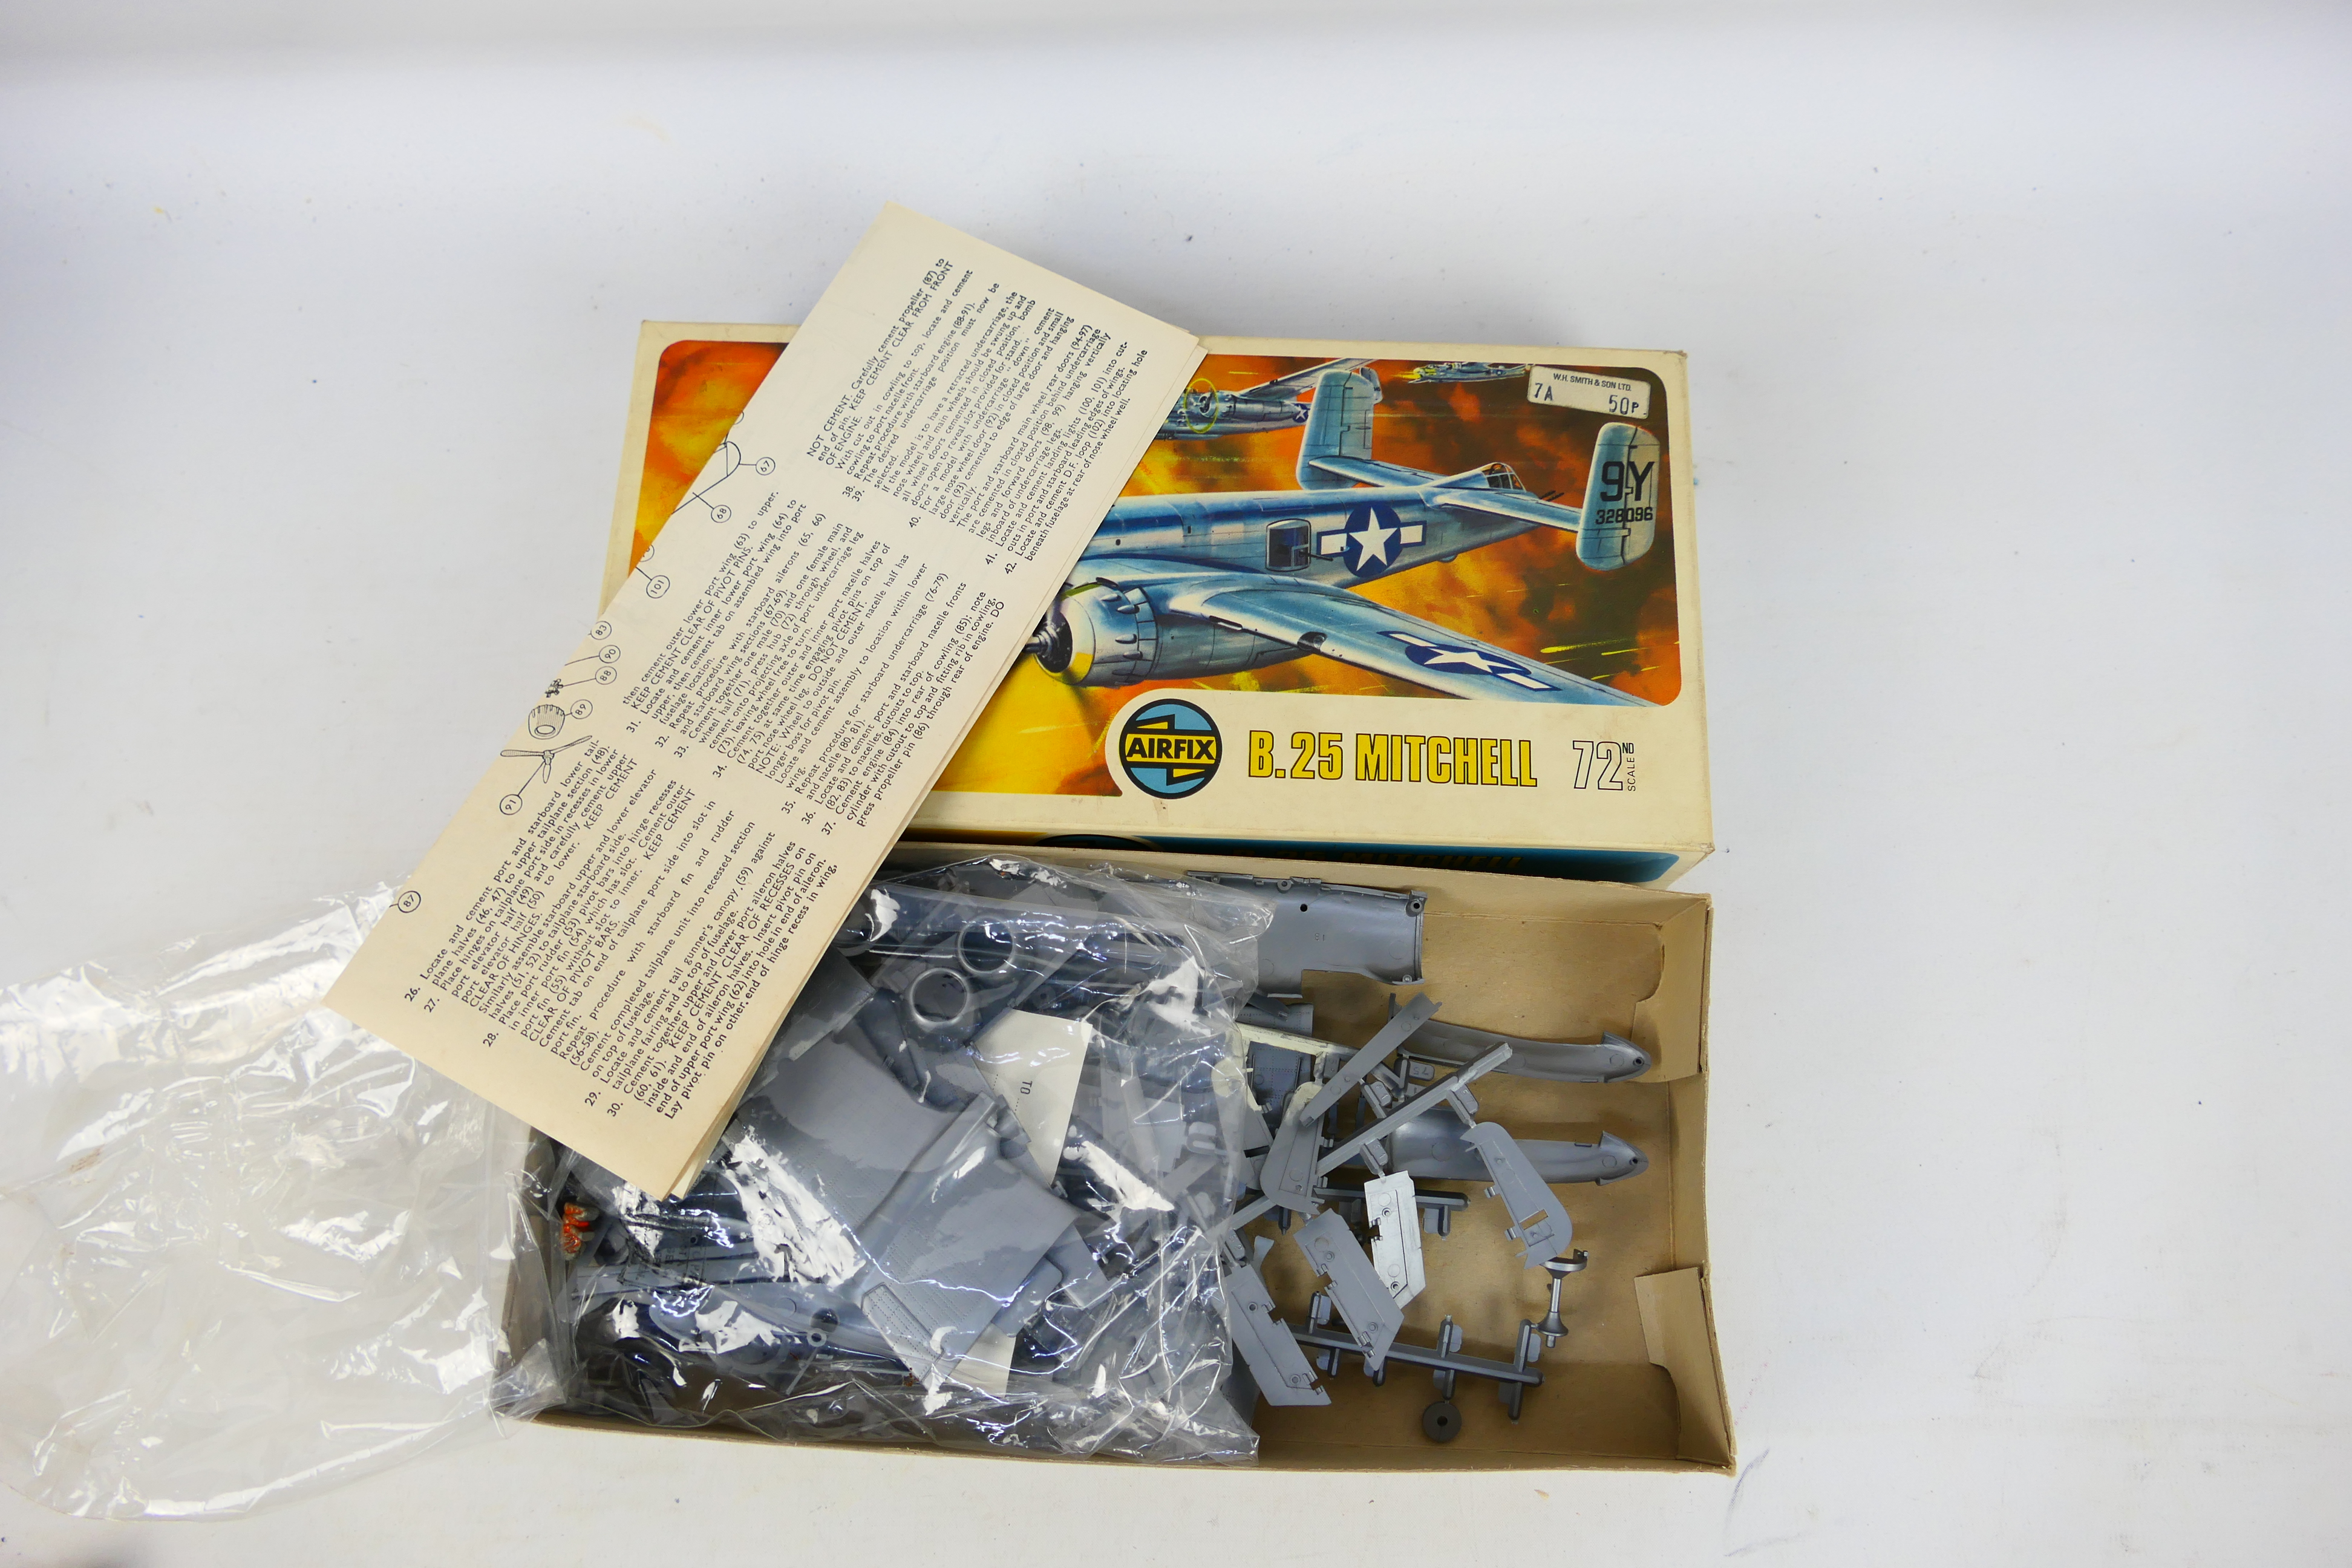 Airfix - Revell - Matchbox - 4 x vintage model kits including Gemini space capsule in 1:24 scale # - Image 3 of 12